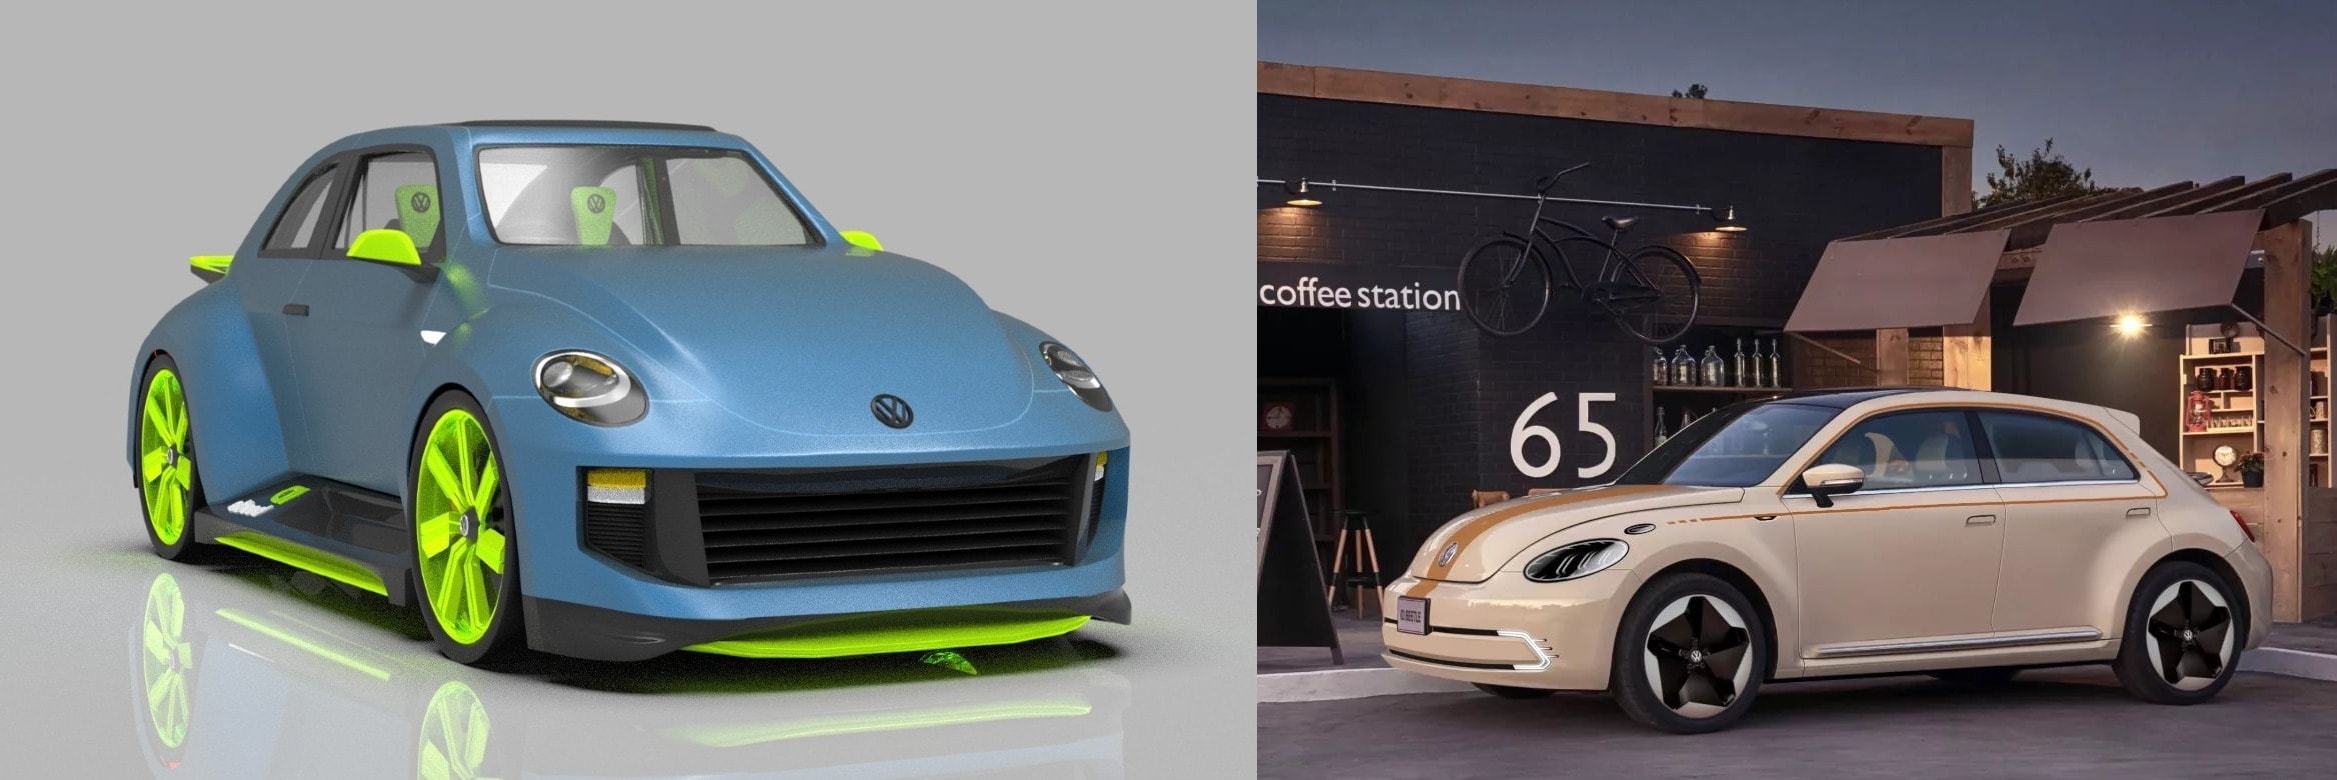  VW ID. Beetle Projects Create a Virtual Revival Choice of 4-Door or ‘R’ Lifestyles 